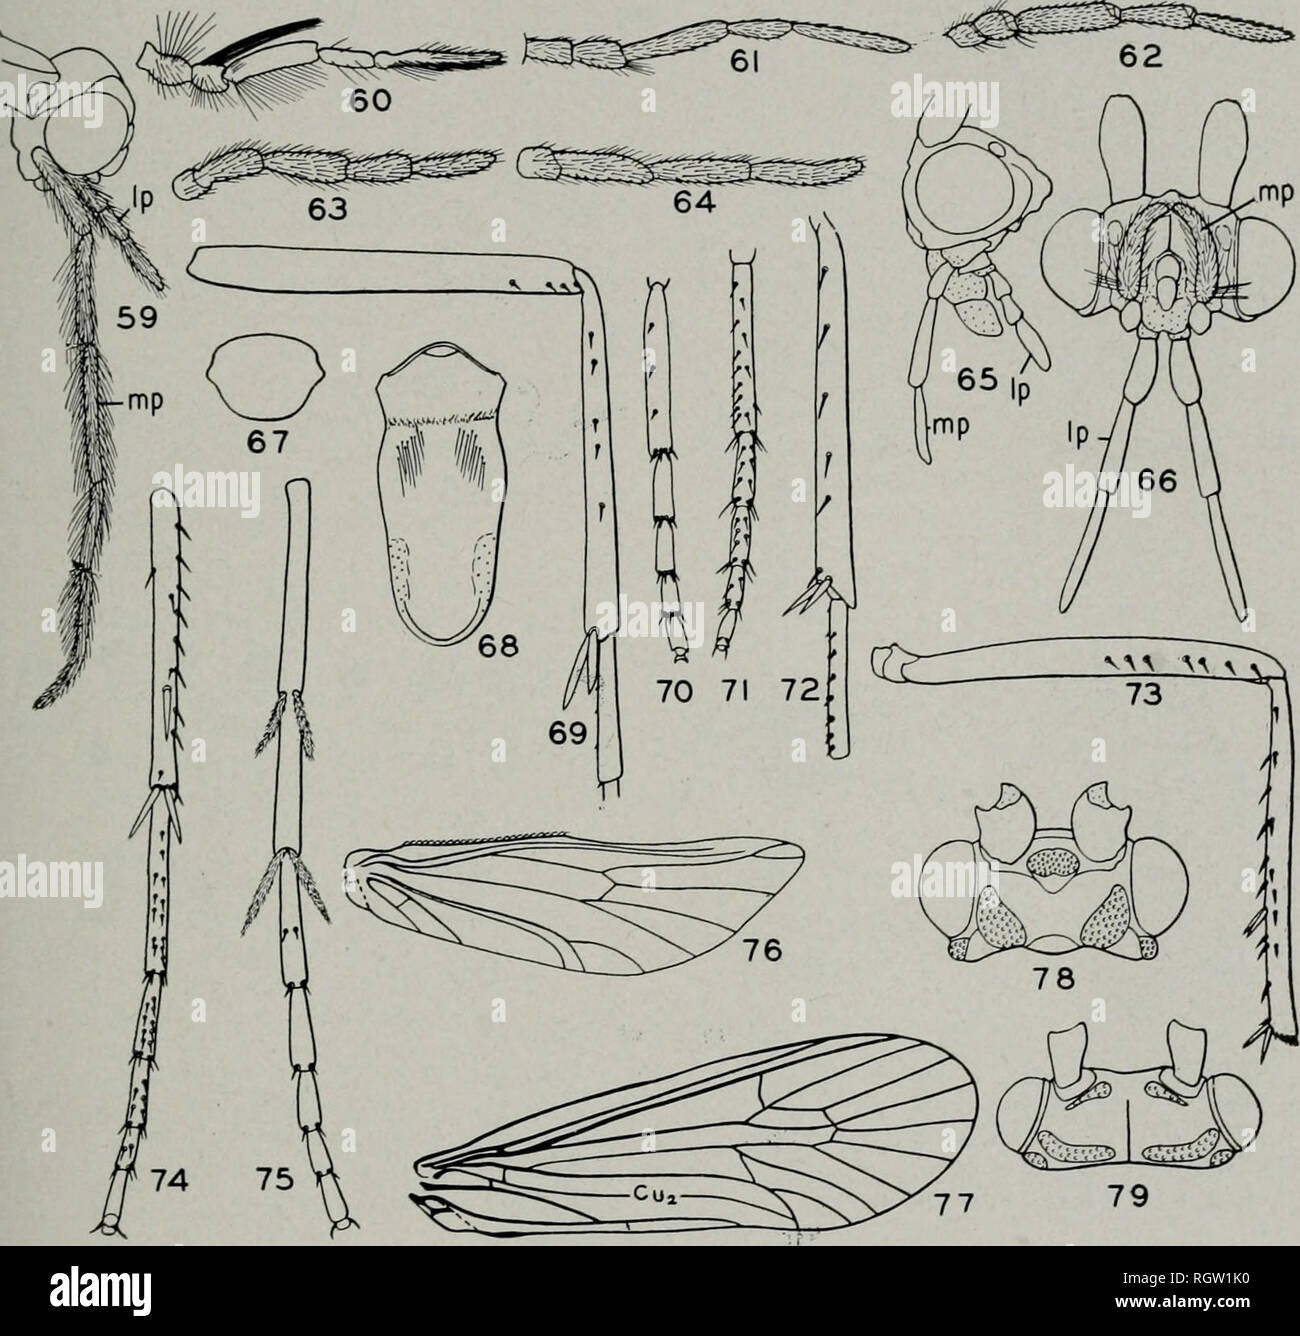 . Bulletin. Natural history; Natural history. August, 1944 Ross: Caddis Flies of Illinois 27 81-90. Includes a size range of 5 to 40 mm 2 2. Ocelli present, fig. 21 3 Ocelli absent 8 3. Maxillary palpi 3-segmented, fig. 65. cf Limnephilidae, p. 176 Maxillary palpi 4- or 5-segmented. ... 4 4. Maxillary palpi 4-segmented, fig. 64. cf Phryganeidae, p. 161 Maxillary palpi 5-segmented, fig. 63. 5 5. Maxillary palpi with fifth segment two or three times as long as fourth, fig. 61 Philopotamidae, p. 44 Maxillary palpi with fifth segment not. Fig. 59.— Triaenodes tarda cf, head; Ip, labial palpus; mp, Stock Photo